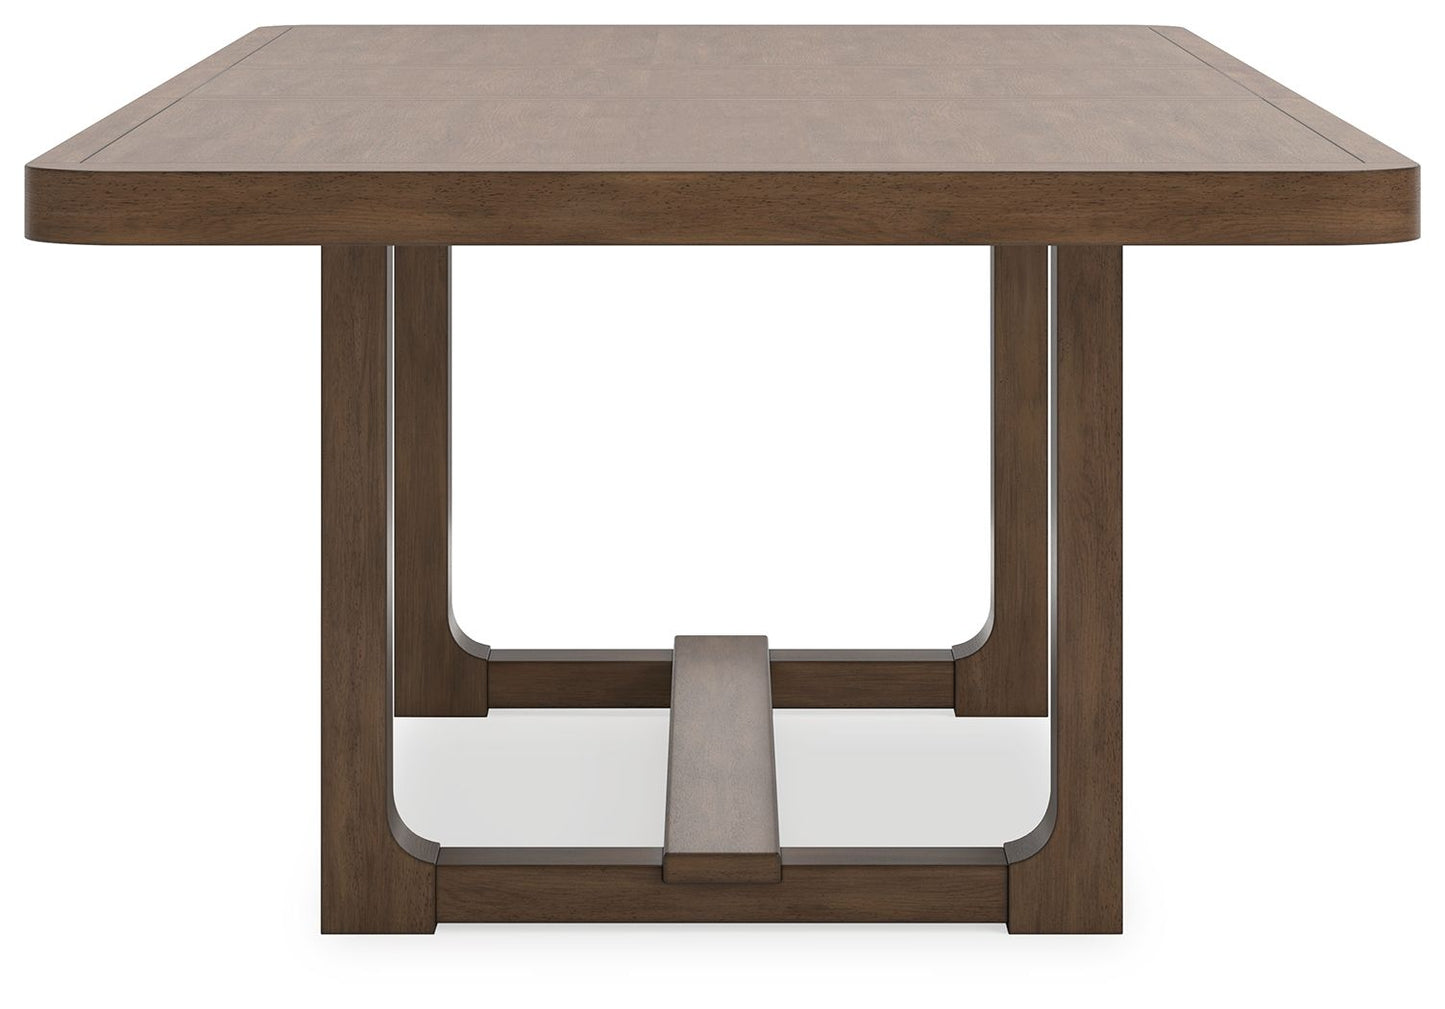 Cabalynn - Light Brown - Rect Dining Room Ext Table